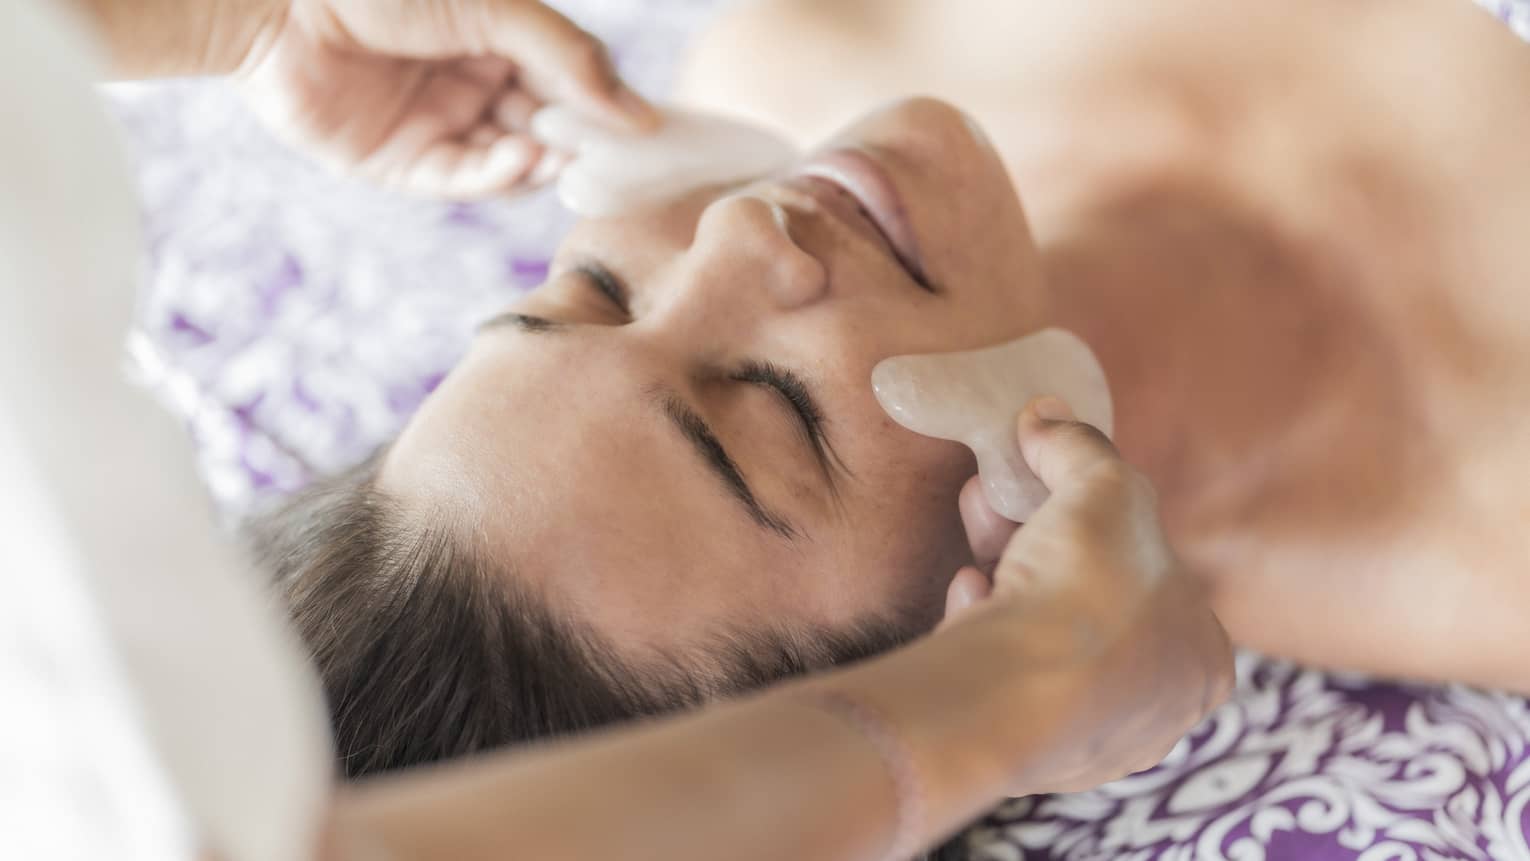 Hands hold stones at woman's cheeks on spa table